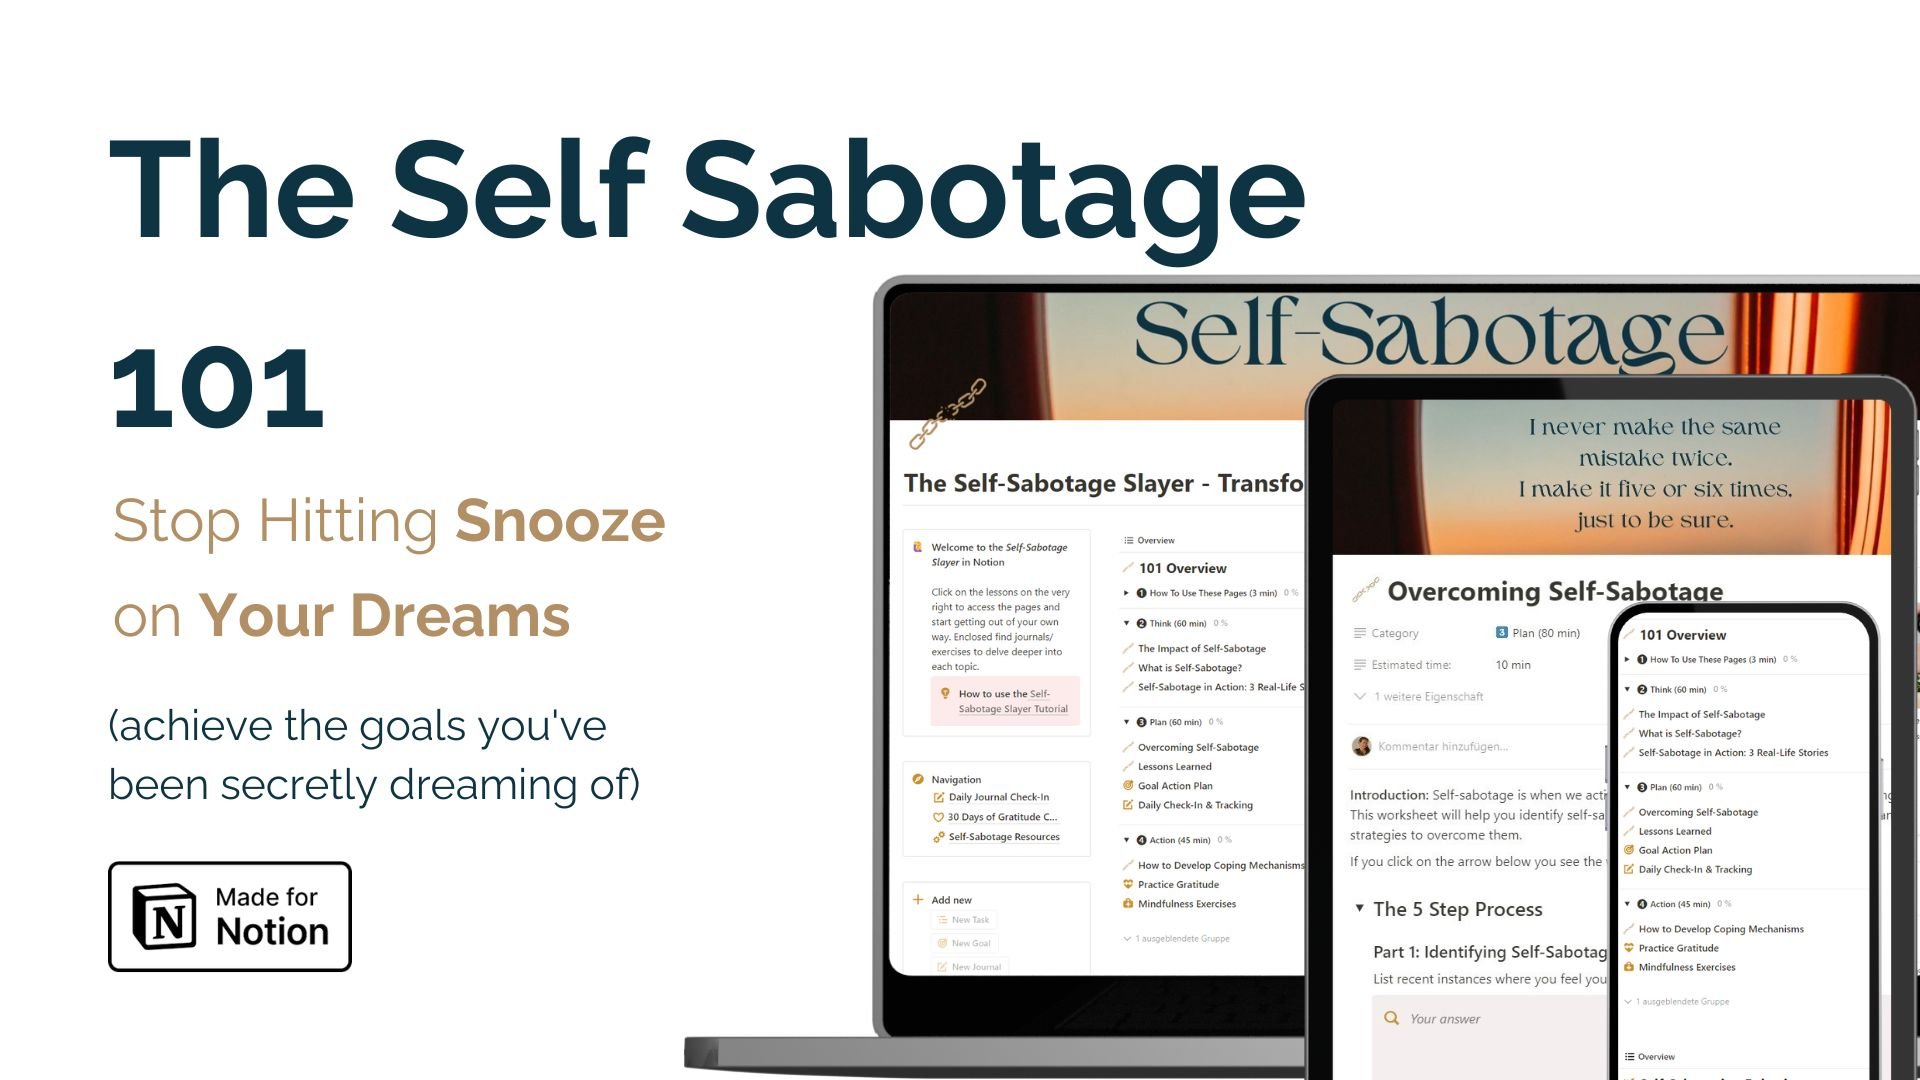 Stop Hitting Snooze on Your Dreams: Slay Self-Doubt and Unleash Your Inner Hero!

Are you tired of:

➸ Procrastinating on your dreams?
➸ Doubting your abilities?
➸ Feeling Like Your Worst Enemy?

You're not alone.